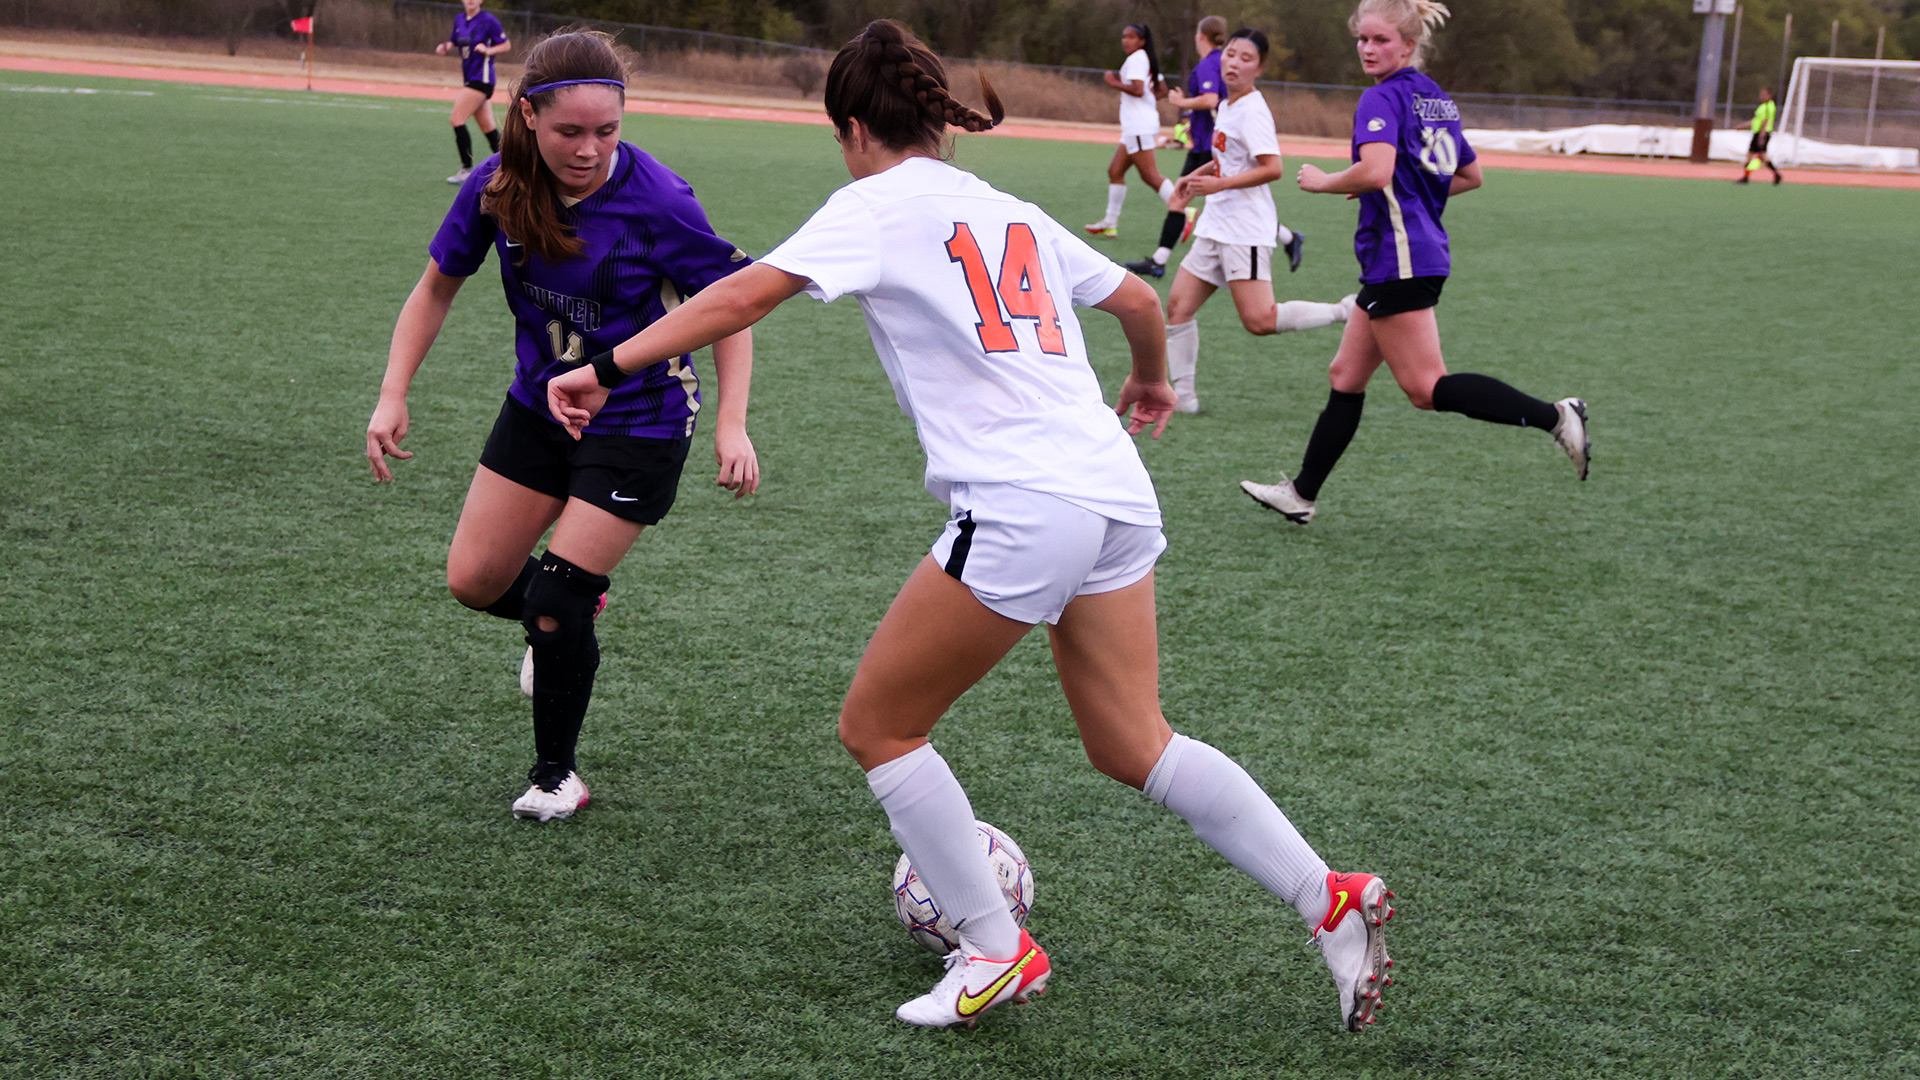 Late goal lifts Butler to 3-2 road win over Lady Tiger soccer team